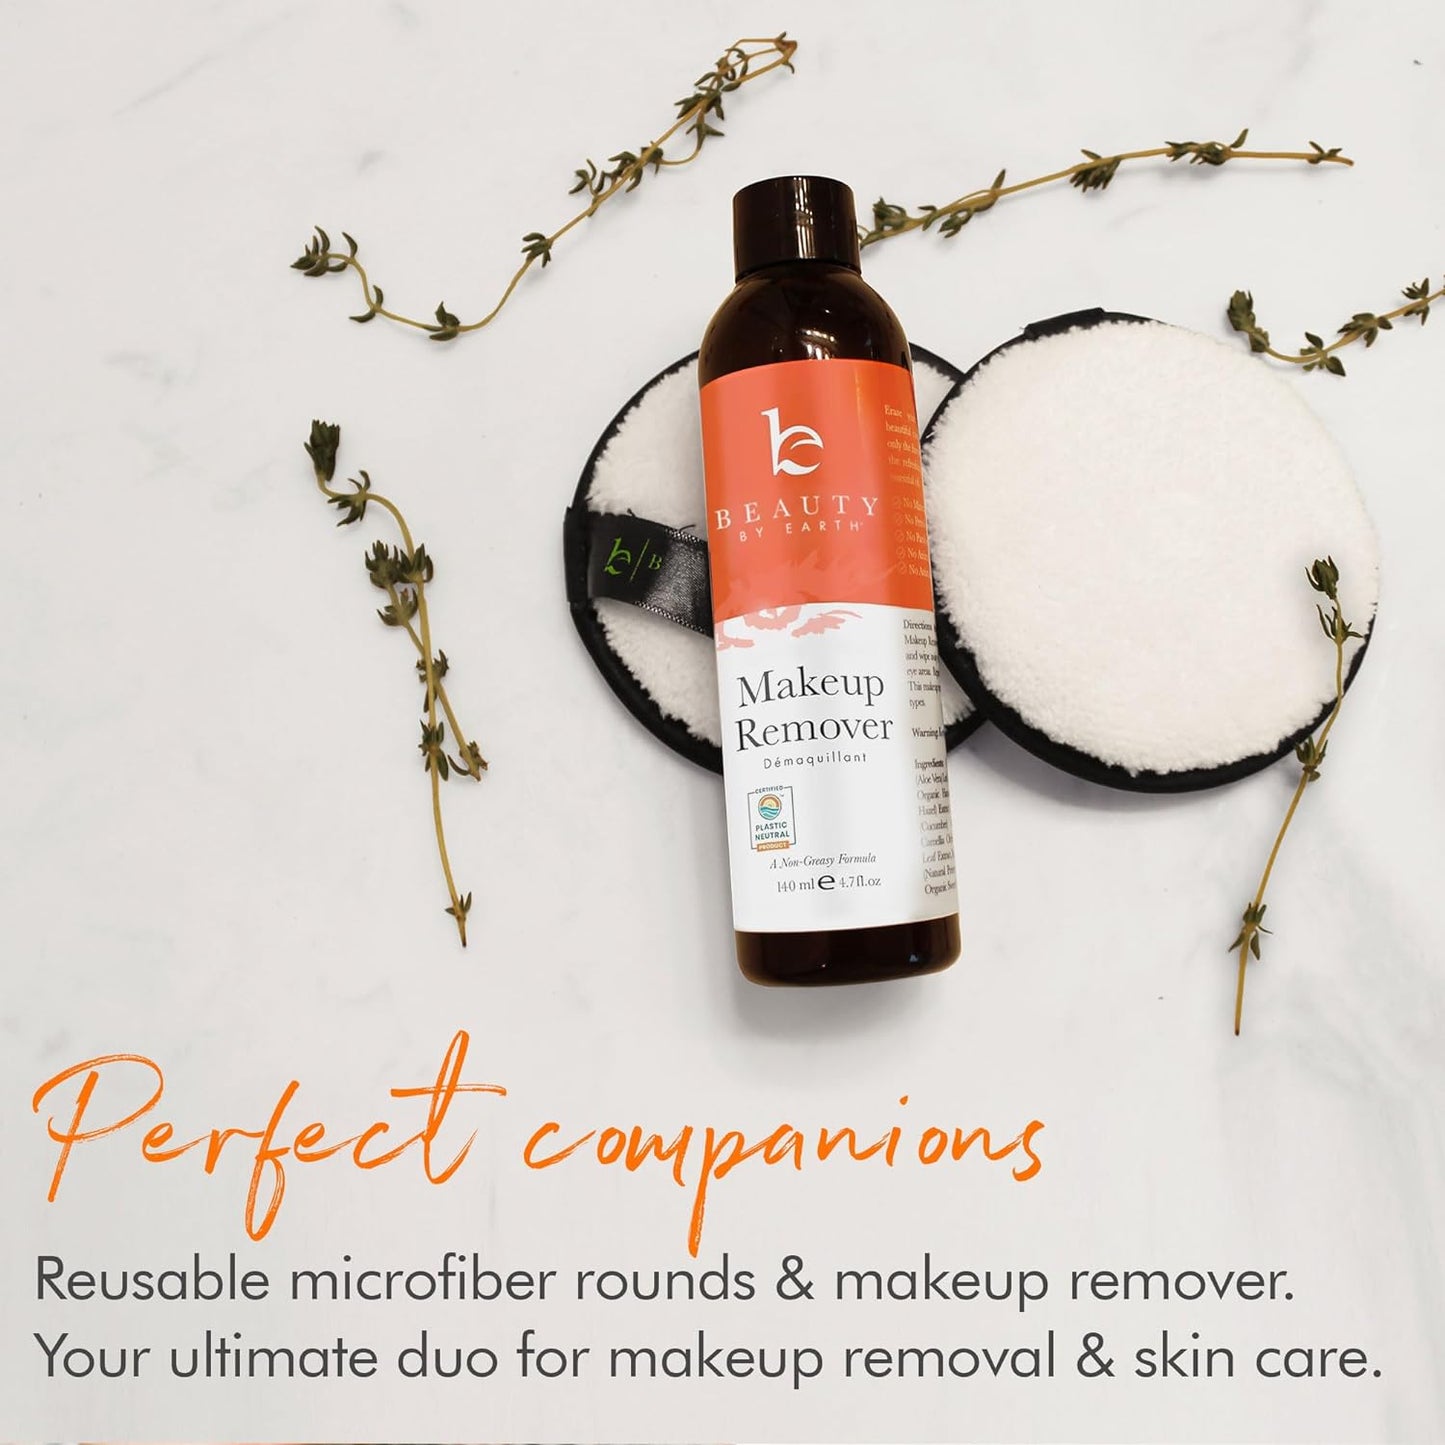 Makeup Remover - USA Made with Natural & Organic Ingredients Face and Eye Make up Remover, Use with Wipes or Cotton Pads, Gentle Non-Greasy Makeup Remover for Dry, Oily and Sensitive Skin Types